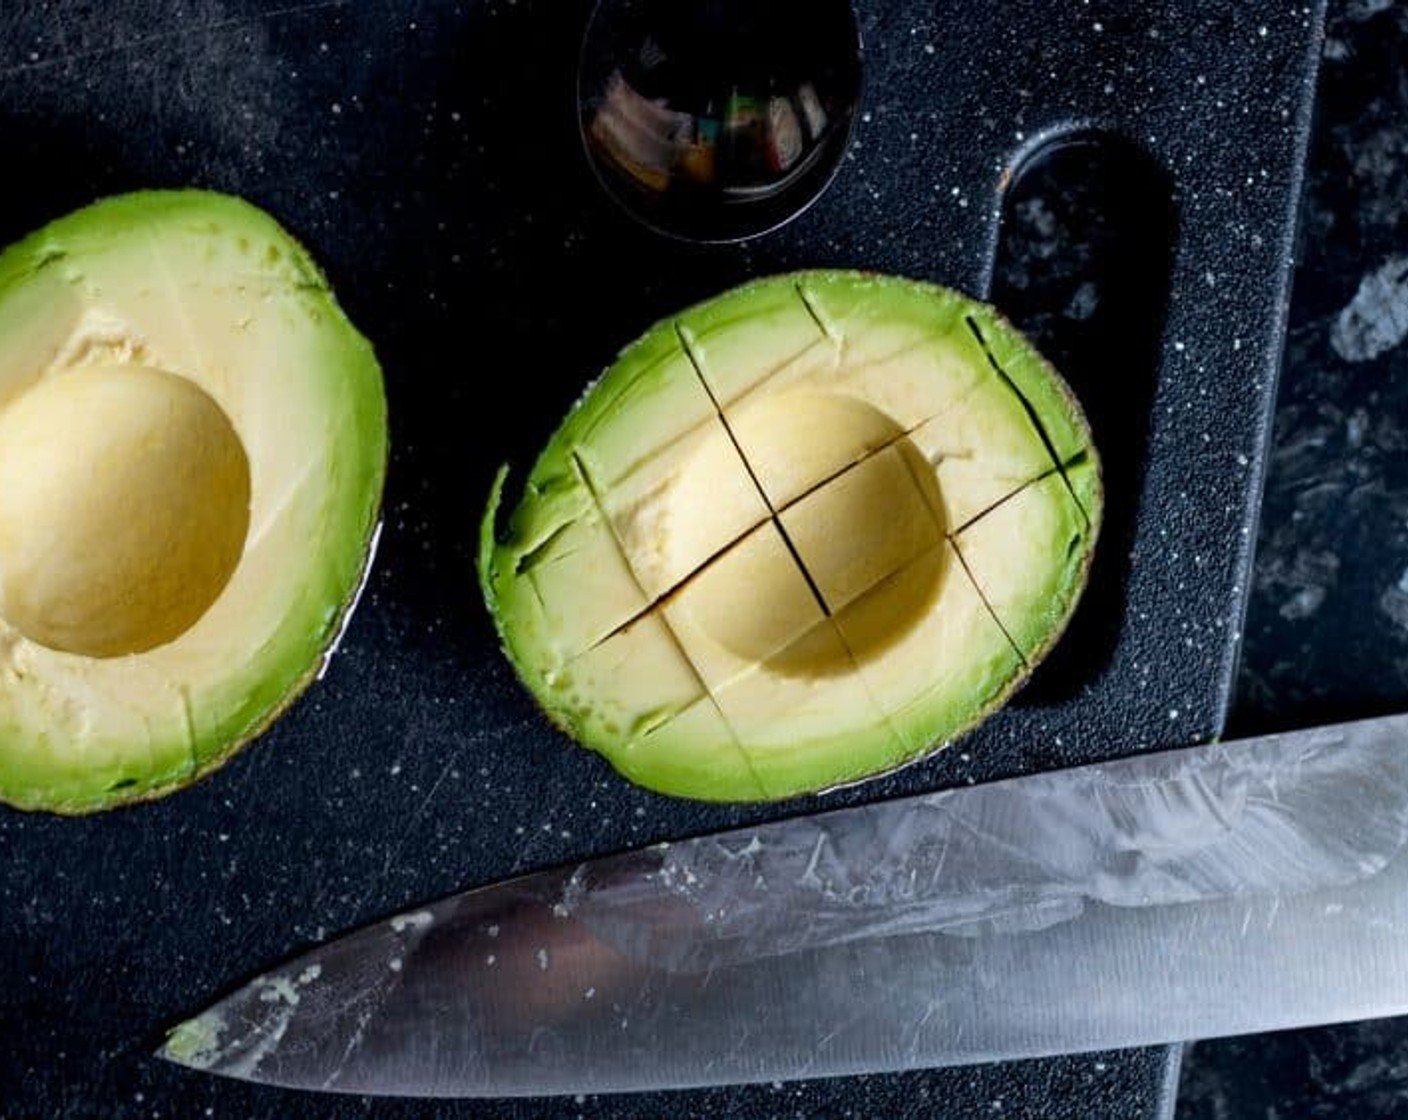 step 1 Cut the Avocados (2) in half and remove the stones. Gently make cuts in the avocado flesh in a cross-hatch pattern, being careful not to break through the avocado peel, and scoop out the flesh.